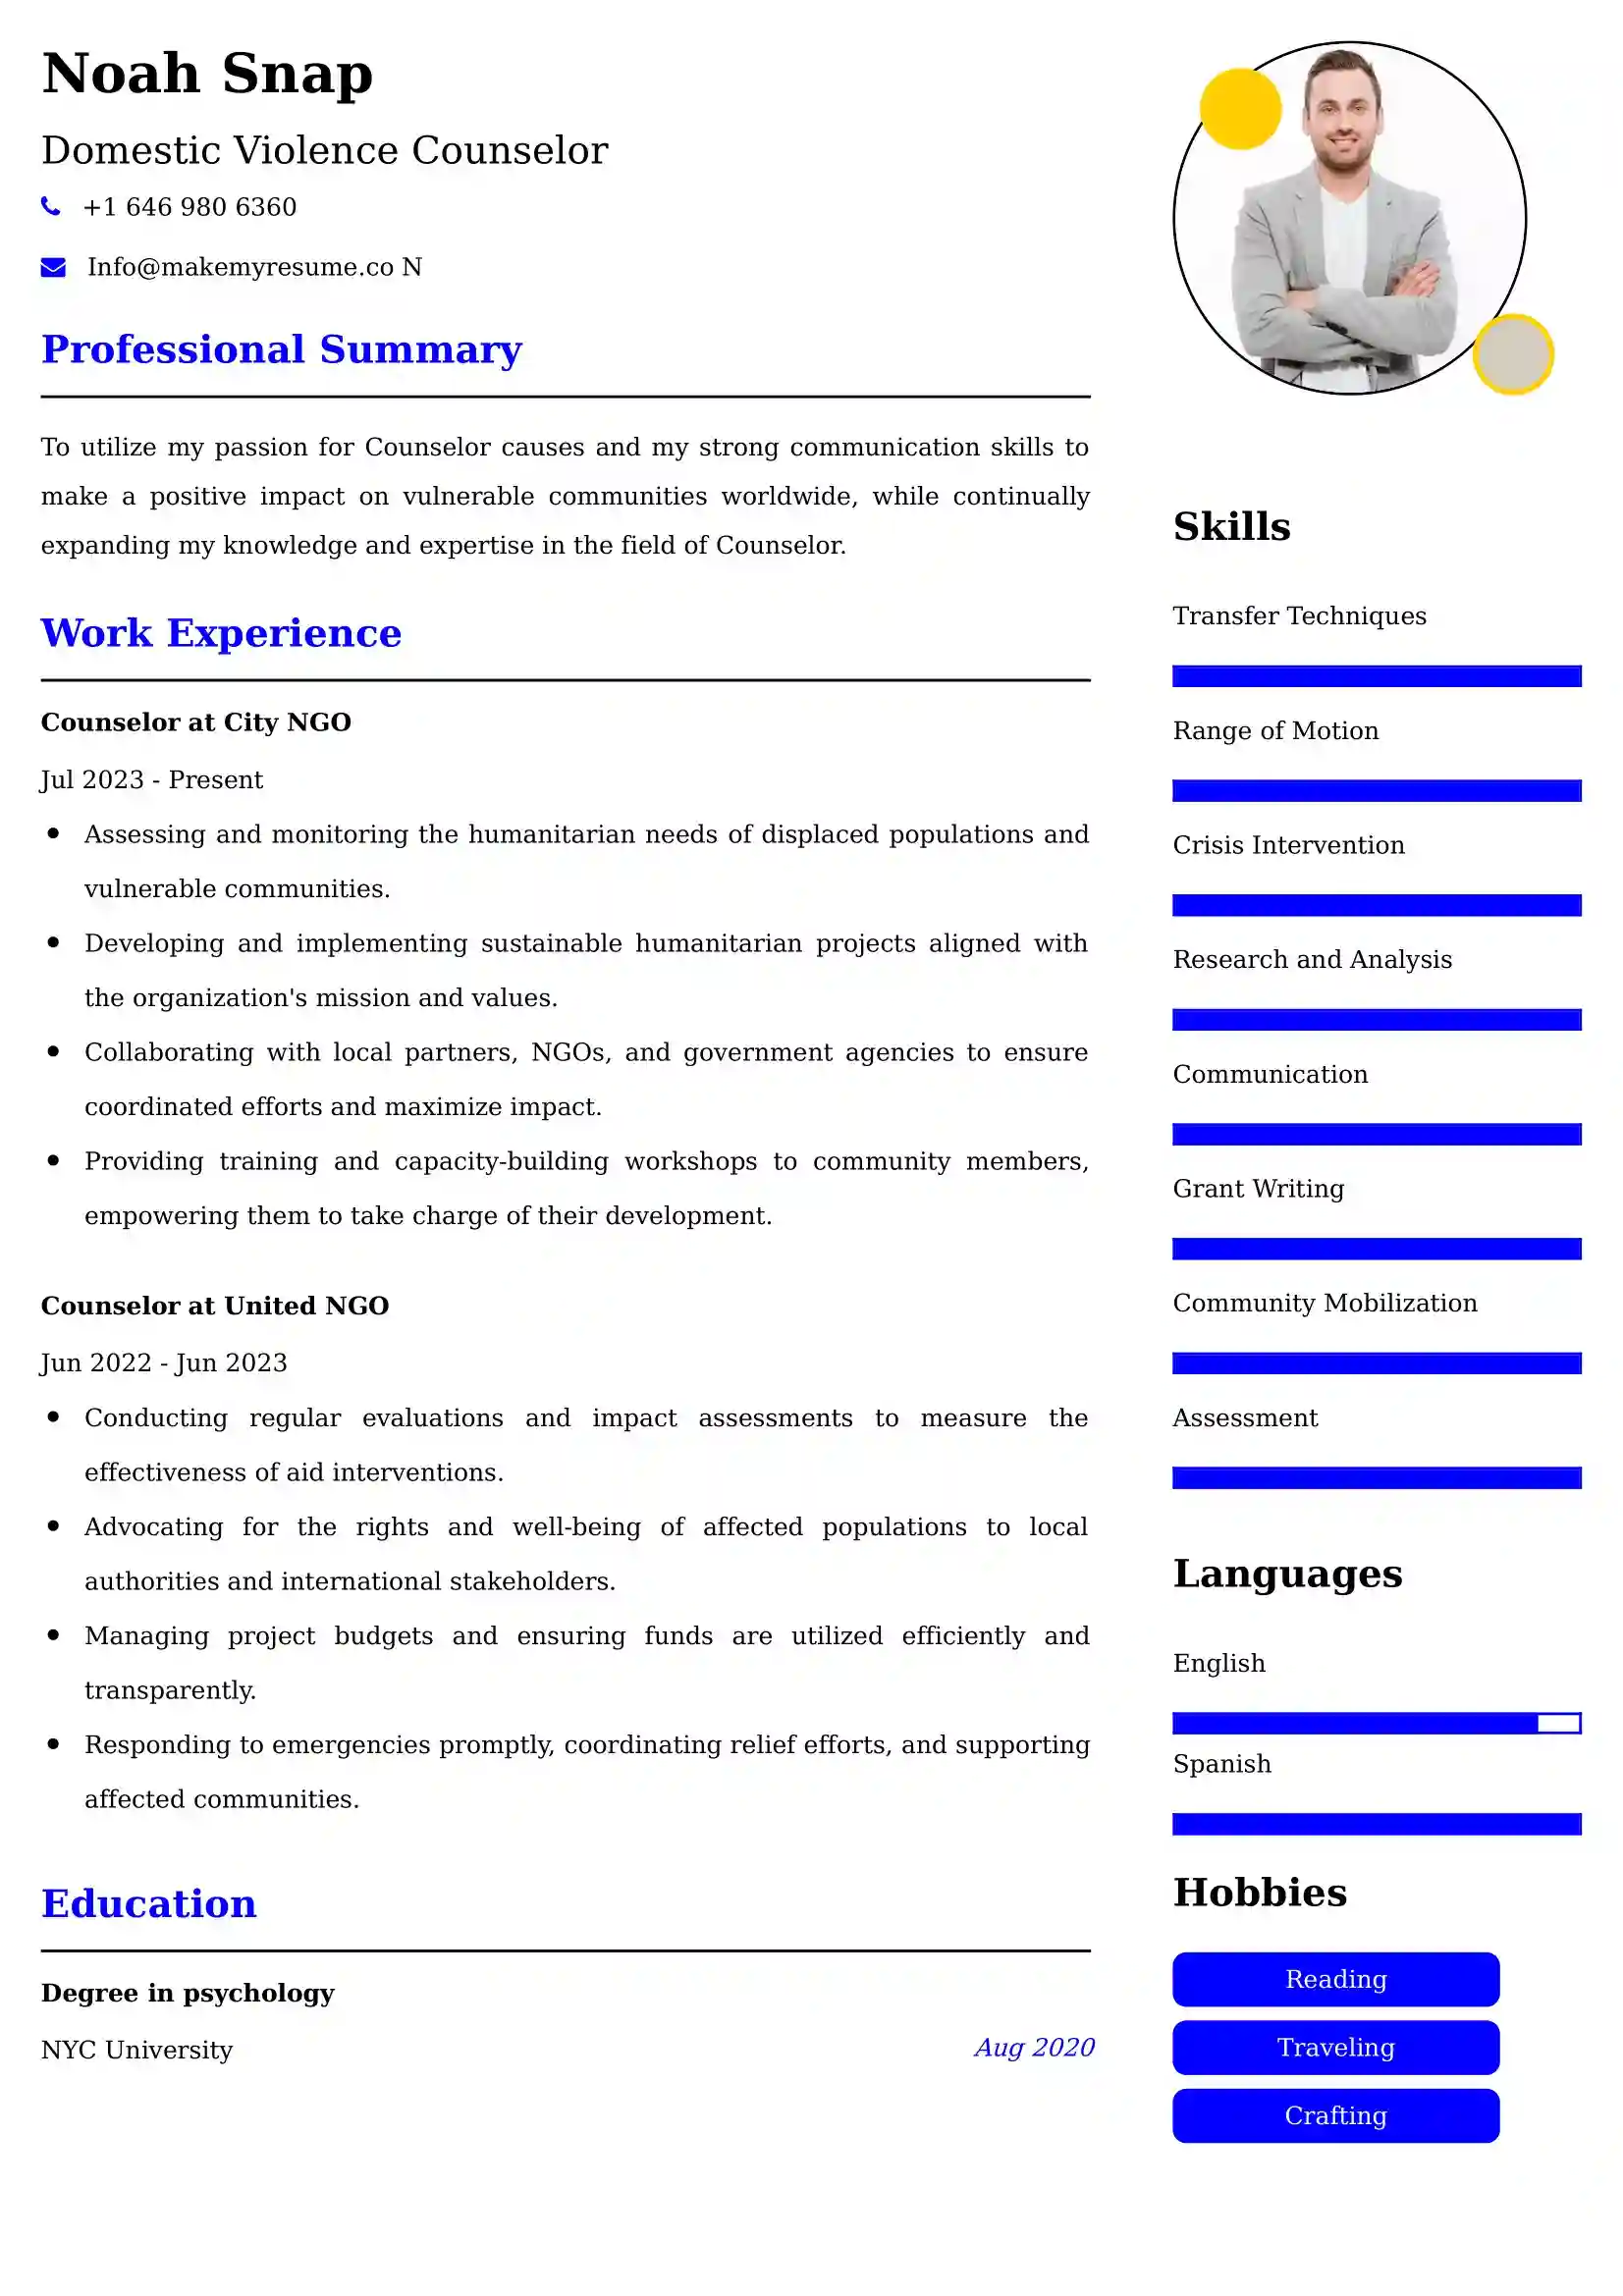 Counselor Resume Examples for UK Jobs - Tips and Guide